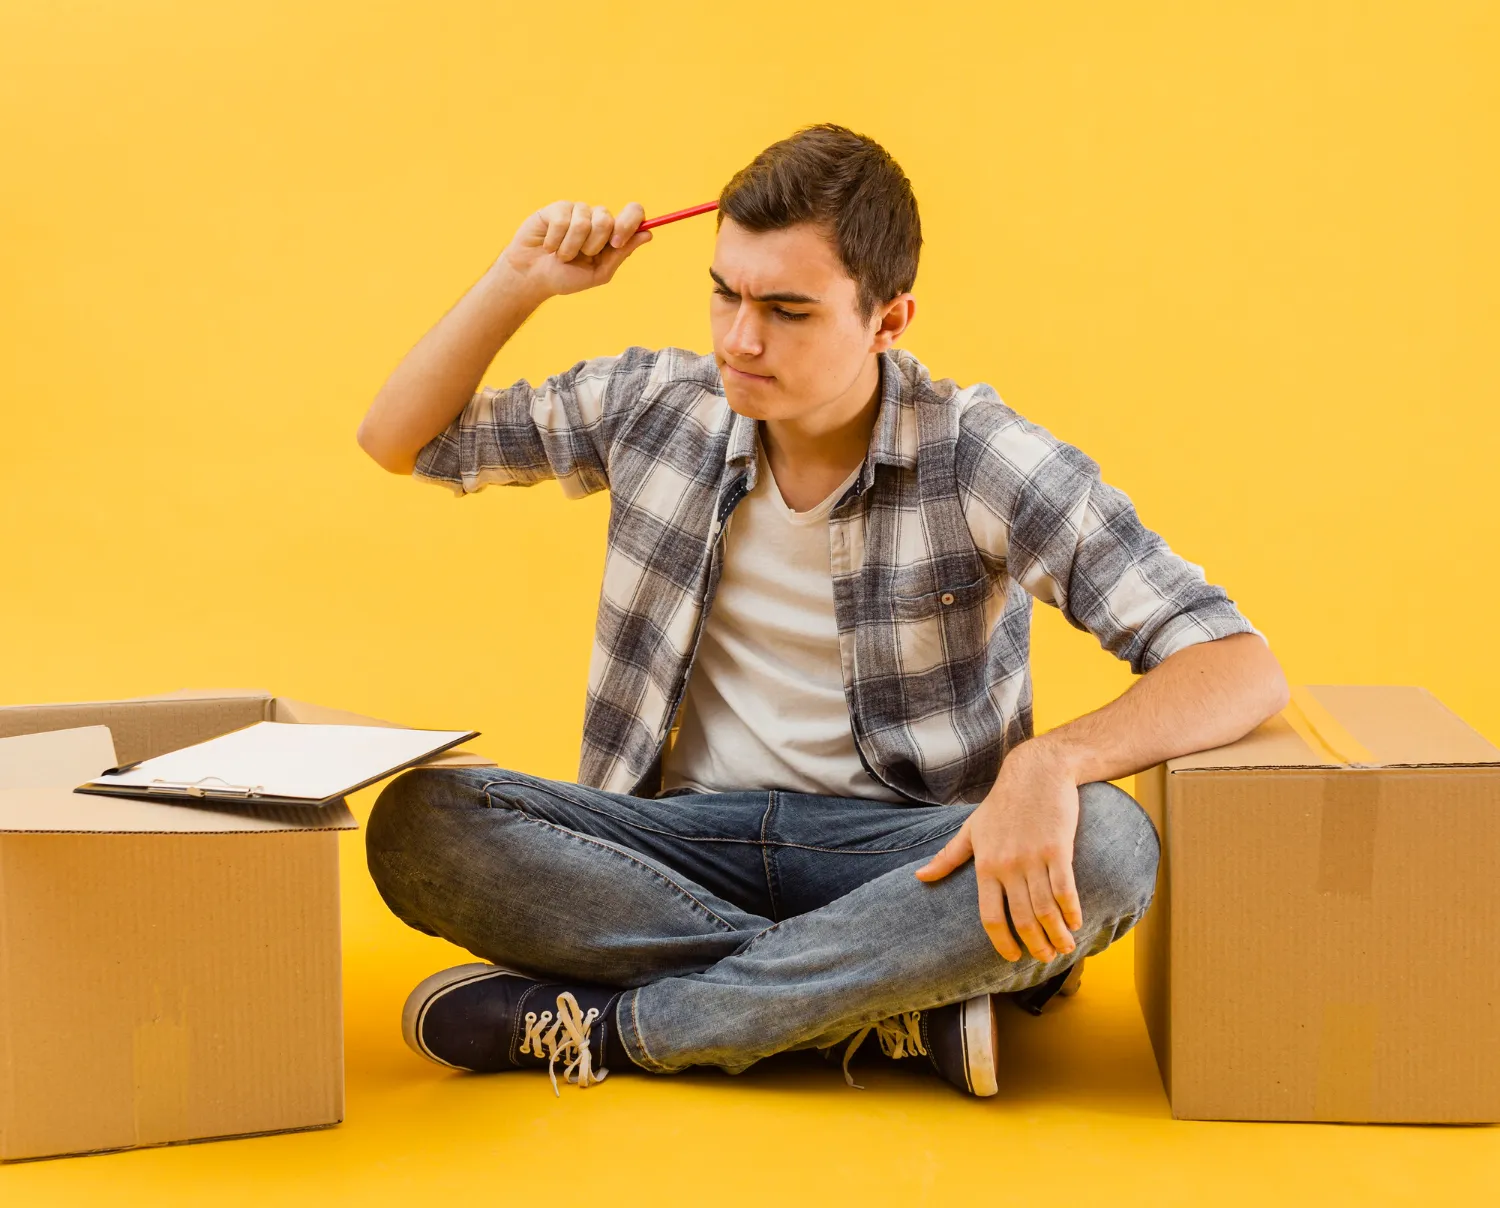 A young man with a pencil to his temple sits cross-legged between two open cardboard boxes, contemplating the differences between open-ended and closed-ended funds, as explained by JOH Partners.